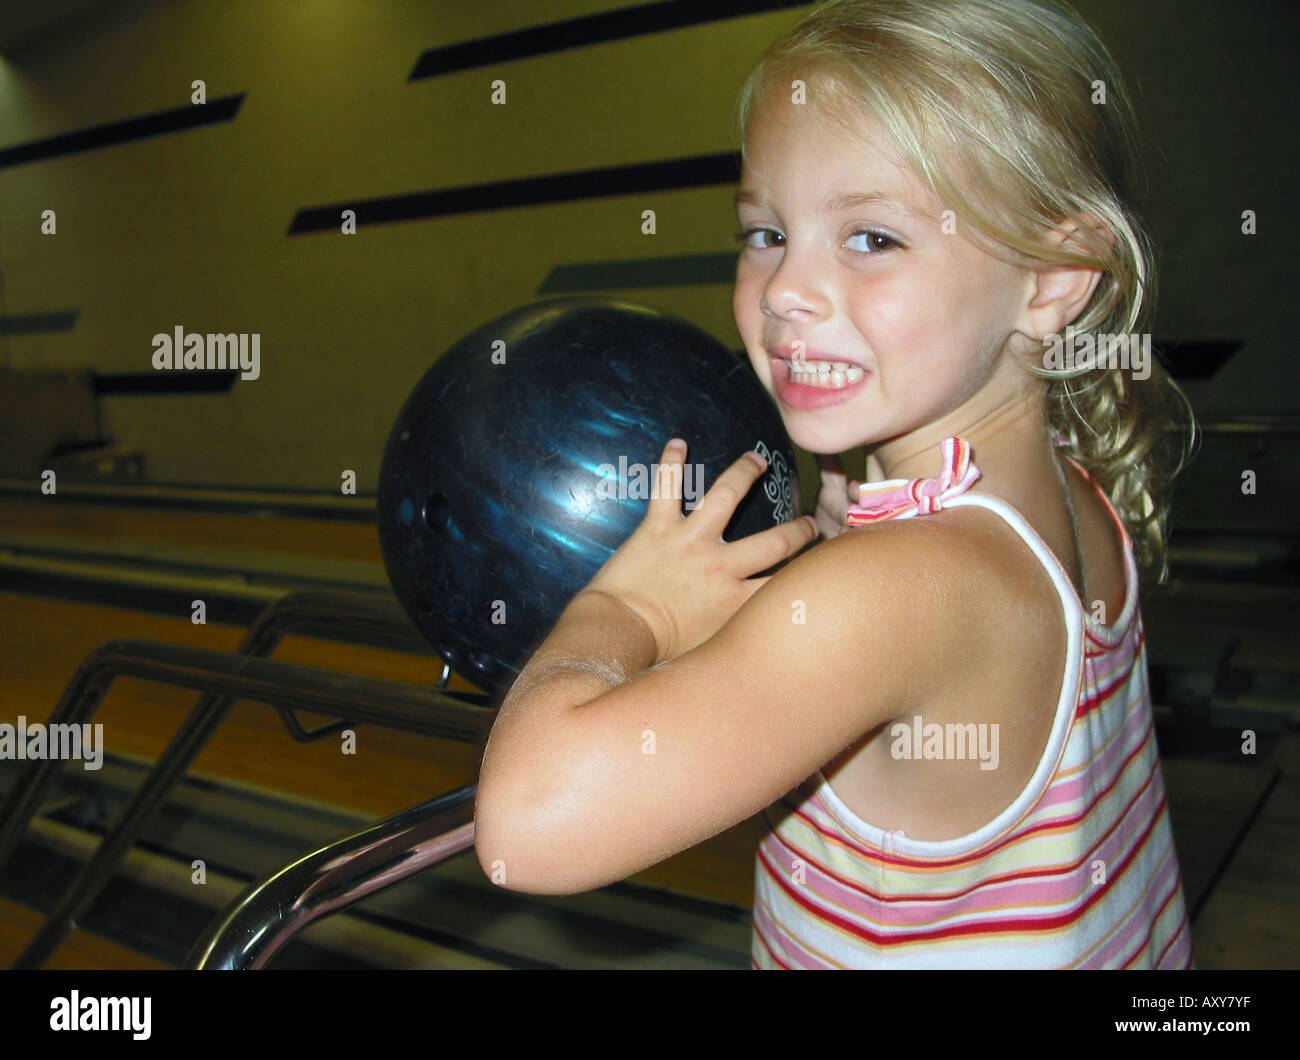 Child getting ready to bowl Stock Photo